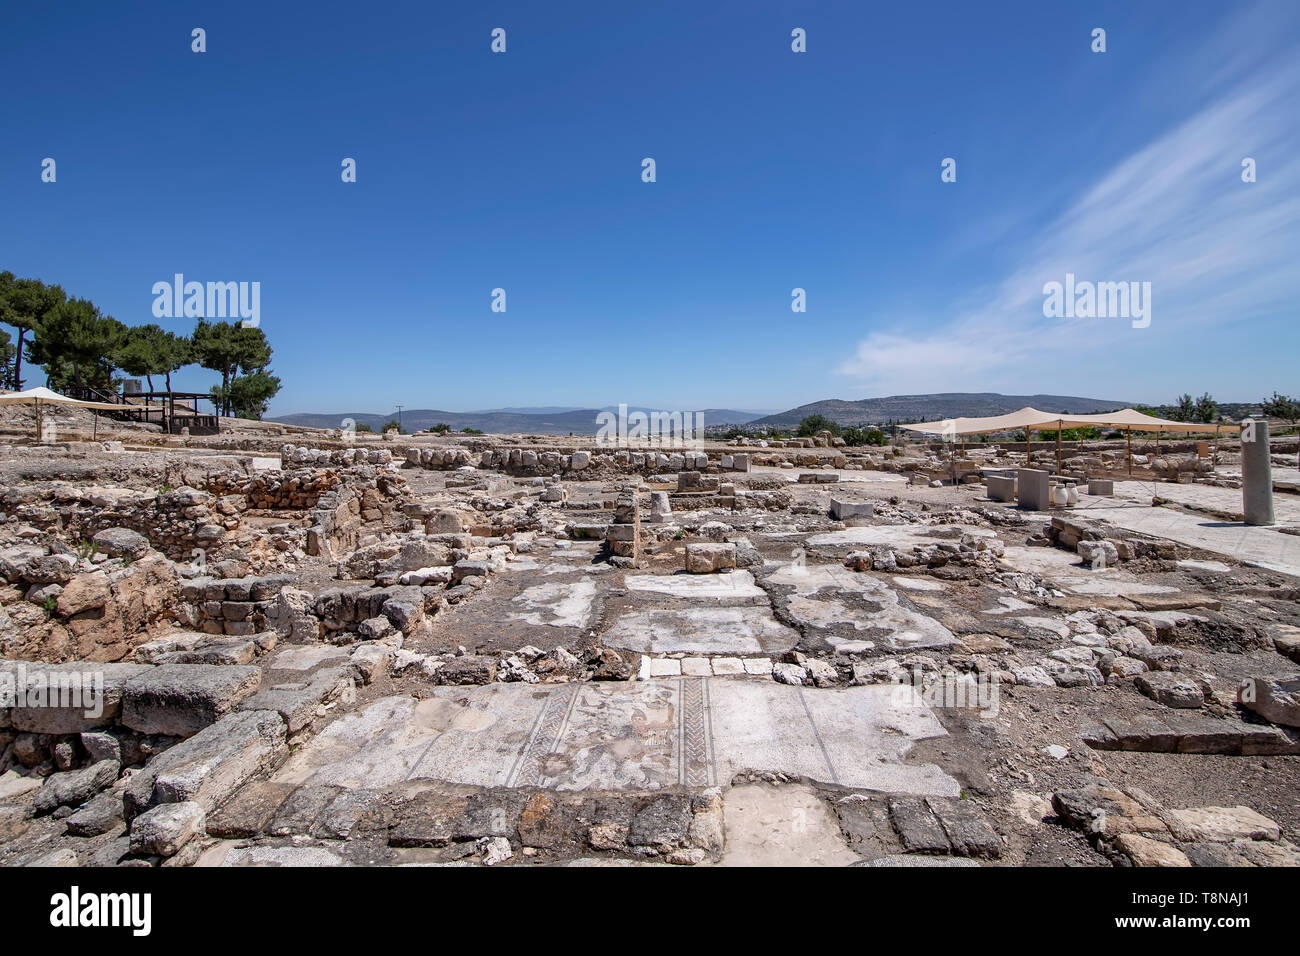 Ruins and mosaics of an ancient city Zippori, National Park, Israel. Ancient city Zippori with its ruins and mosaics is a famous tourist spot Stock Photo